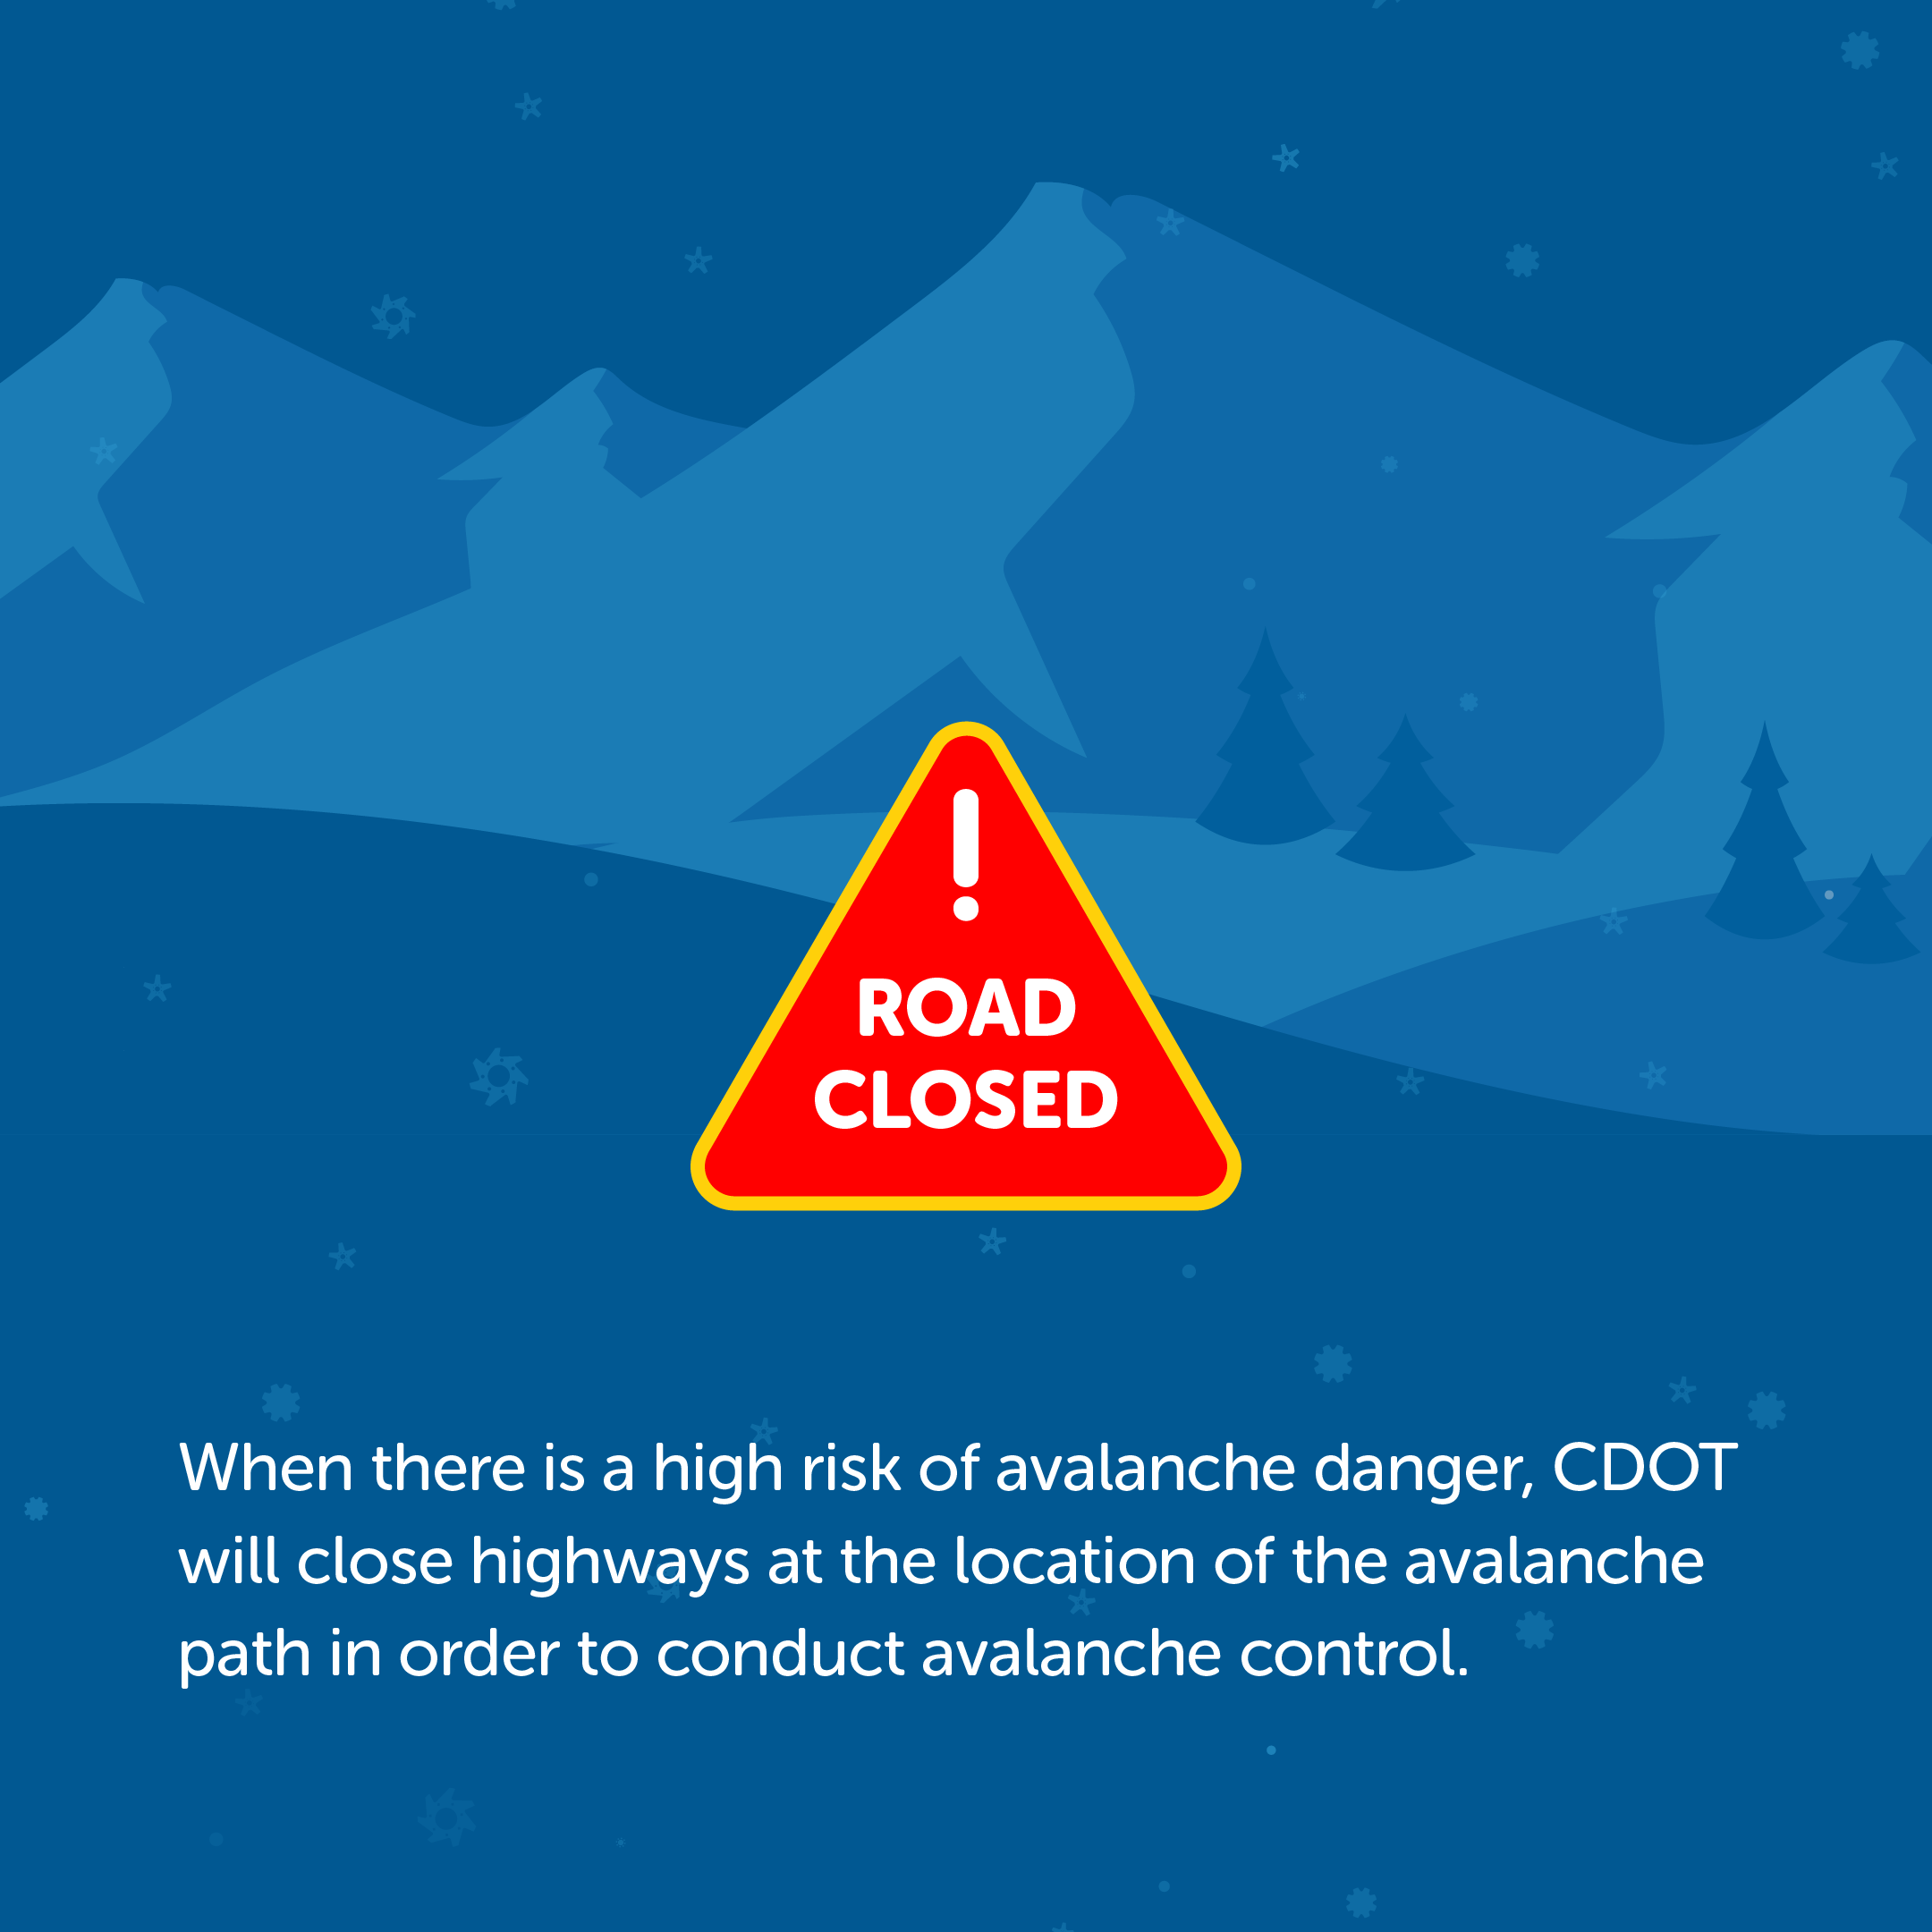 avalanche-control3.png detail image